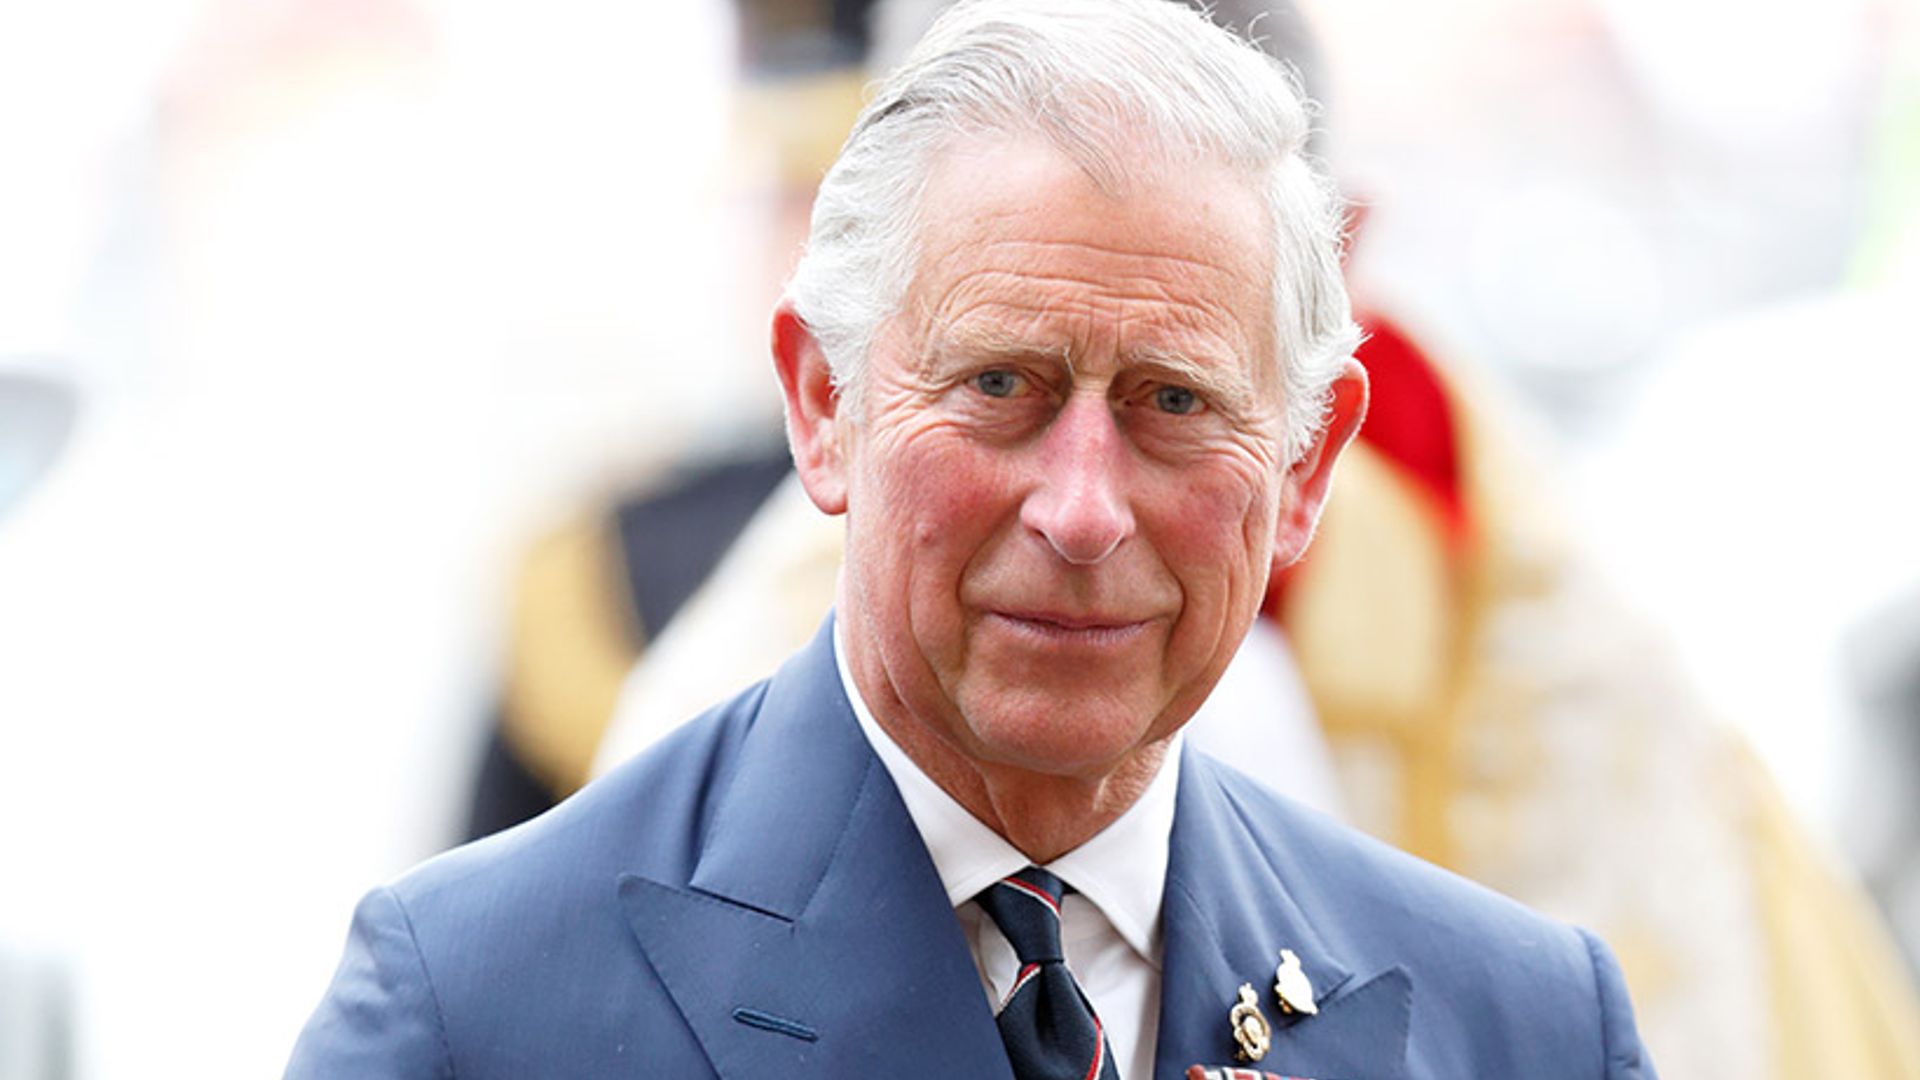 Meghan Markle's dad reacts to news Prince Charles will walk her down the aisle at royal wedding